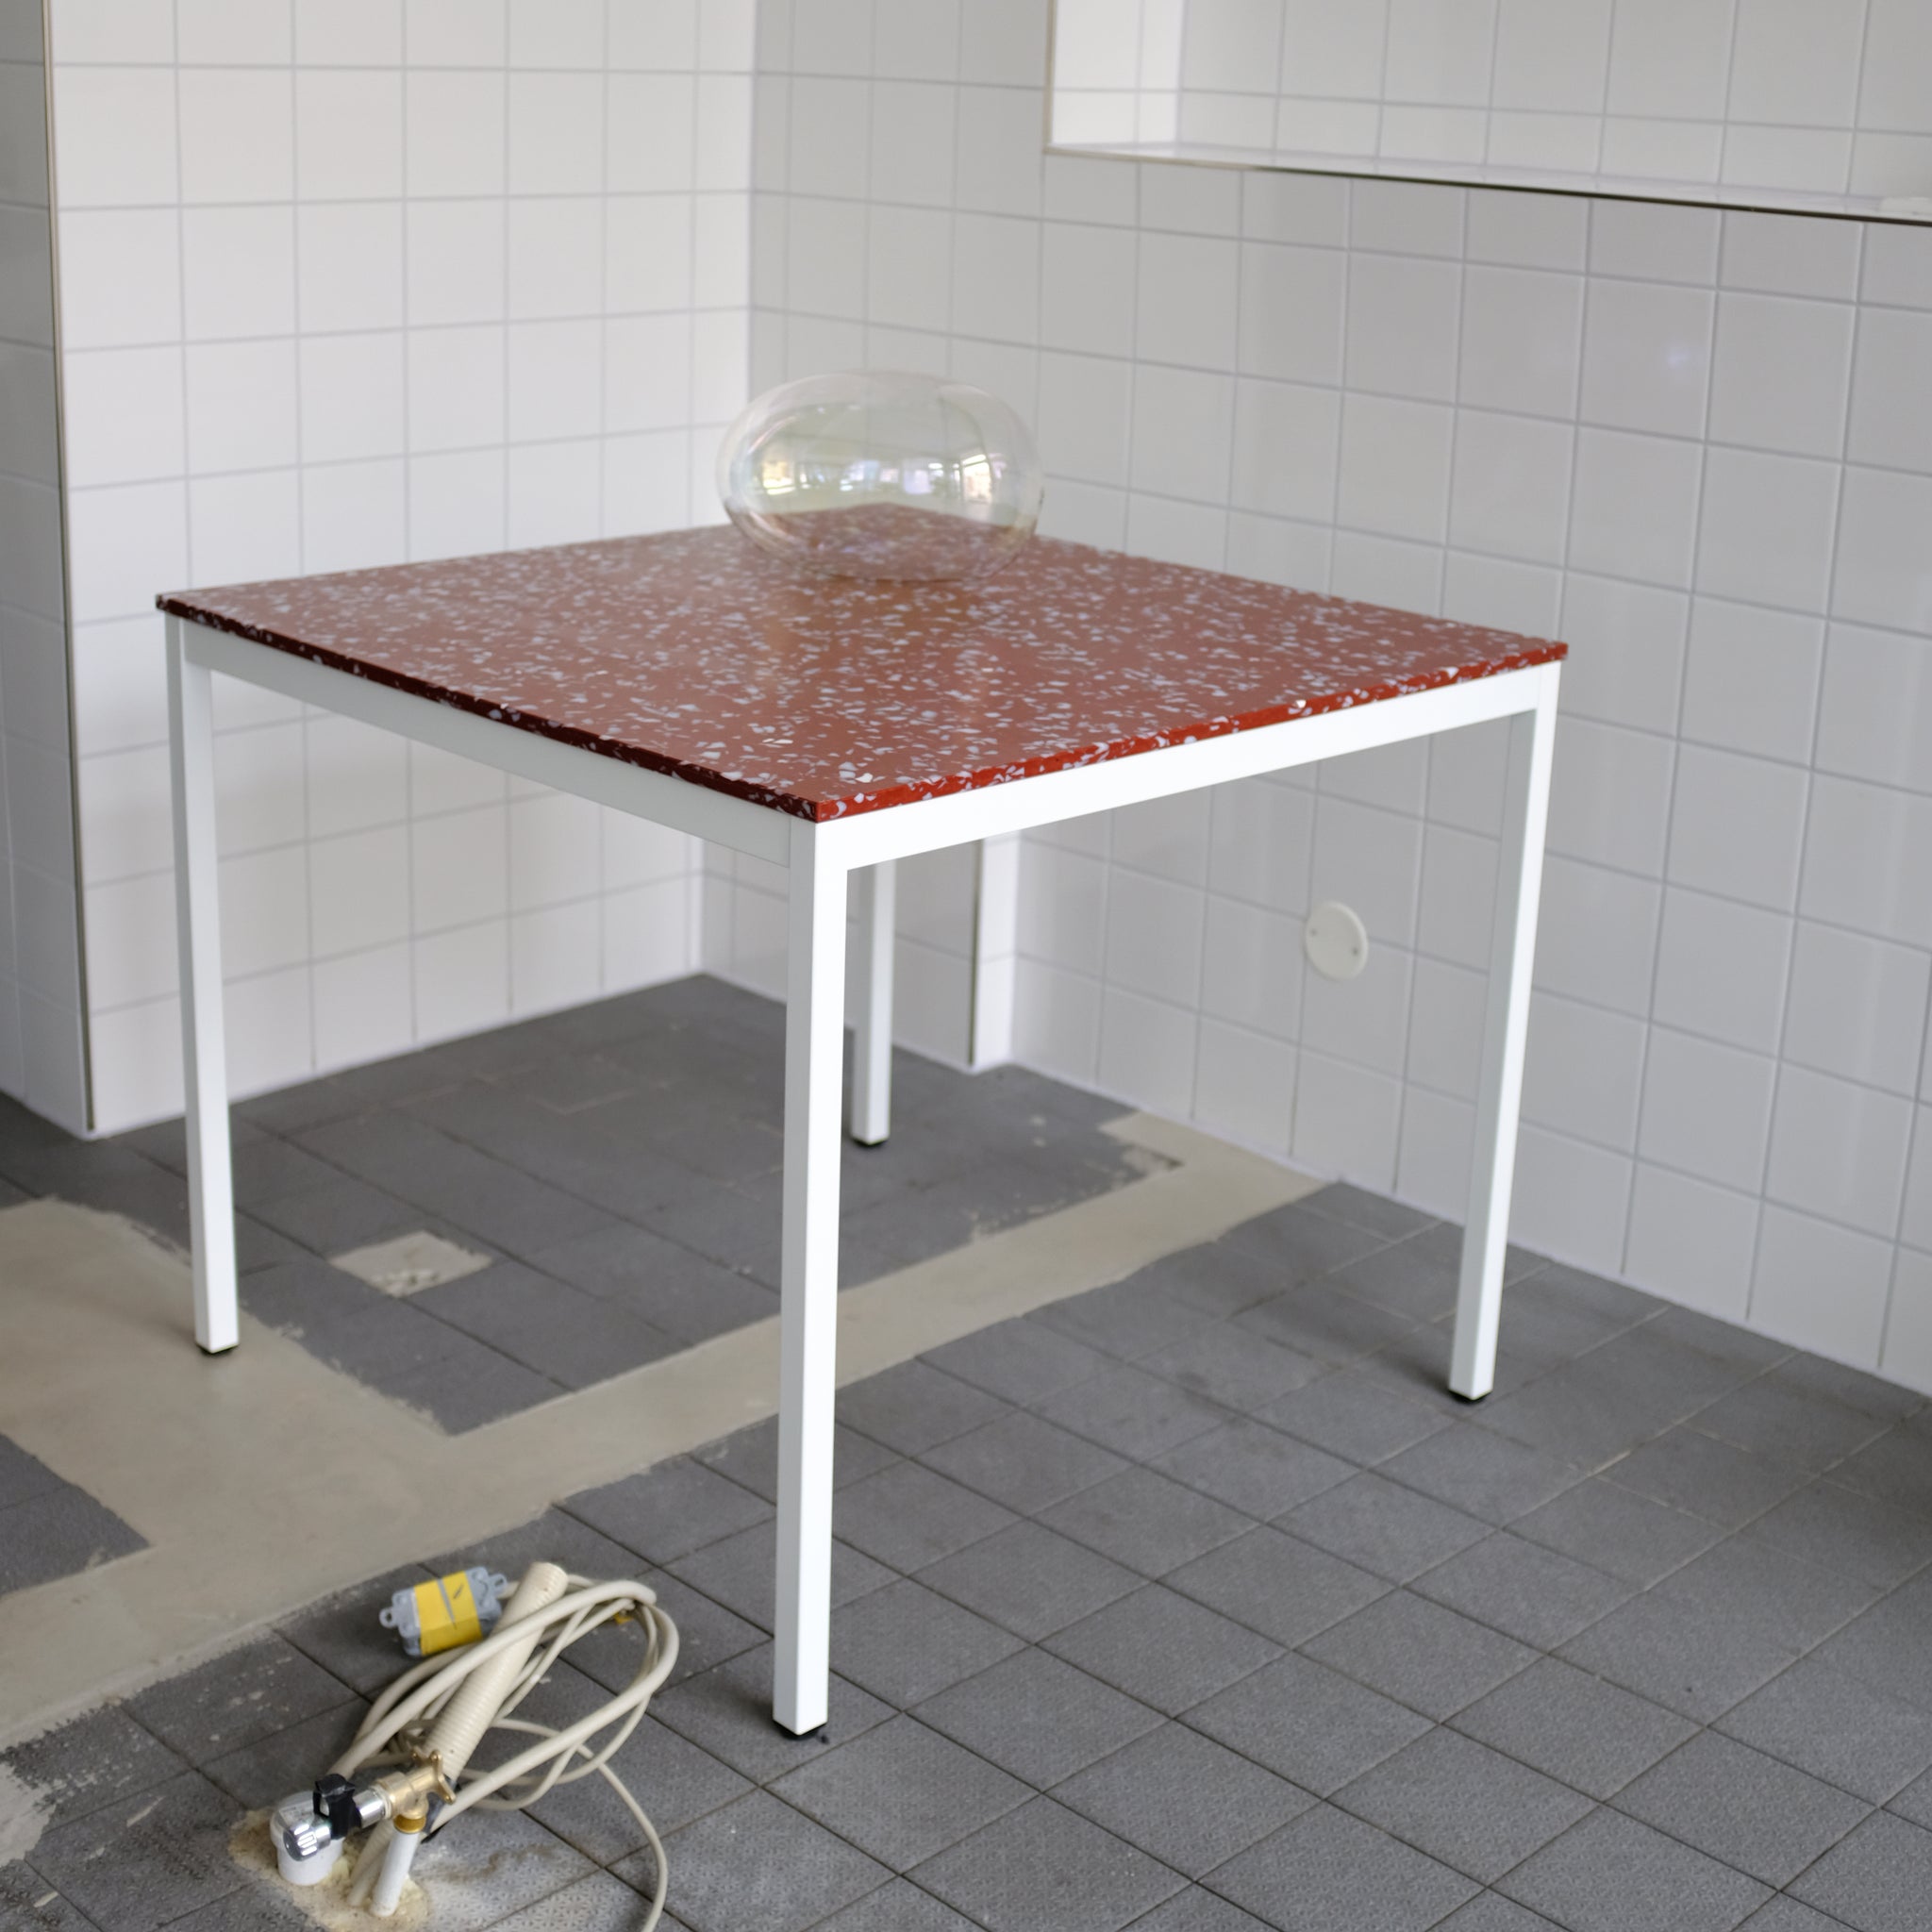 TABLE WITH RED TOP AND WHITE LEGS BY THE MINIMONO PROJECT - BRAND FOR ECO FRIENDLY - PLAYFUL - MULTI FUNCTIONAL - SUSTAINABLE - HIGH QUALITY - DESIGN FURNITURE FROM RECYCLED PLASTIC FOR BOTH ADULT AND CHILDREN MADE IN BERLIN GERMANY